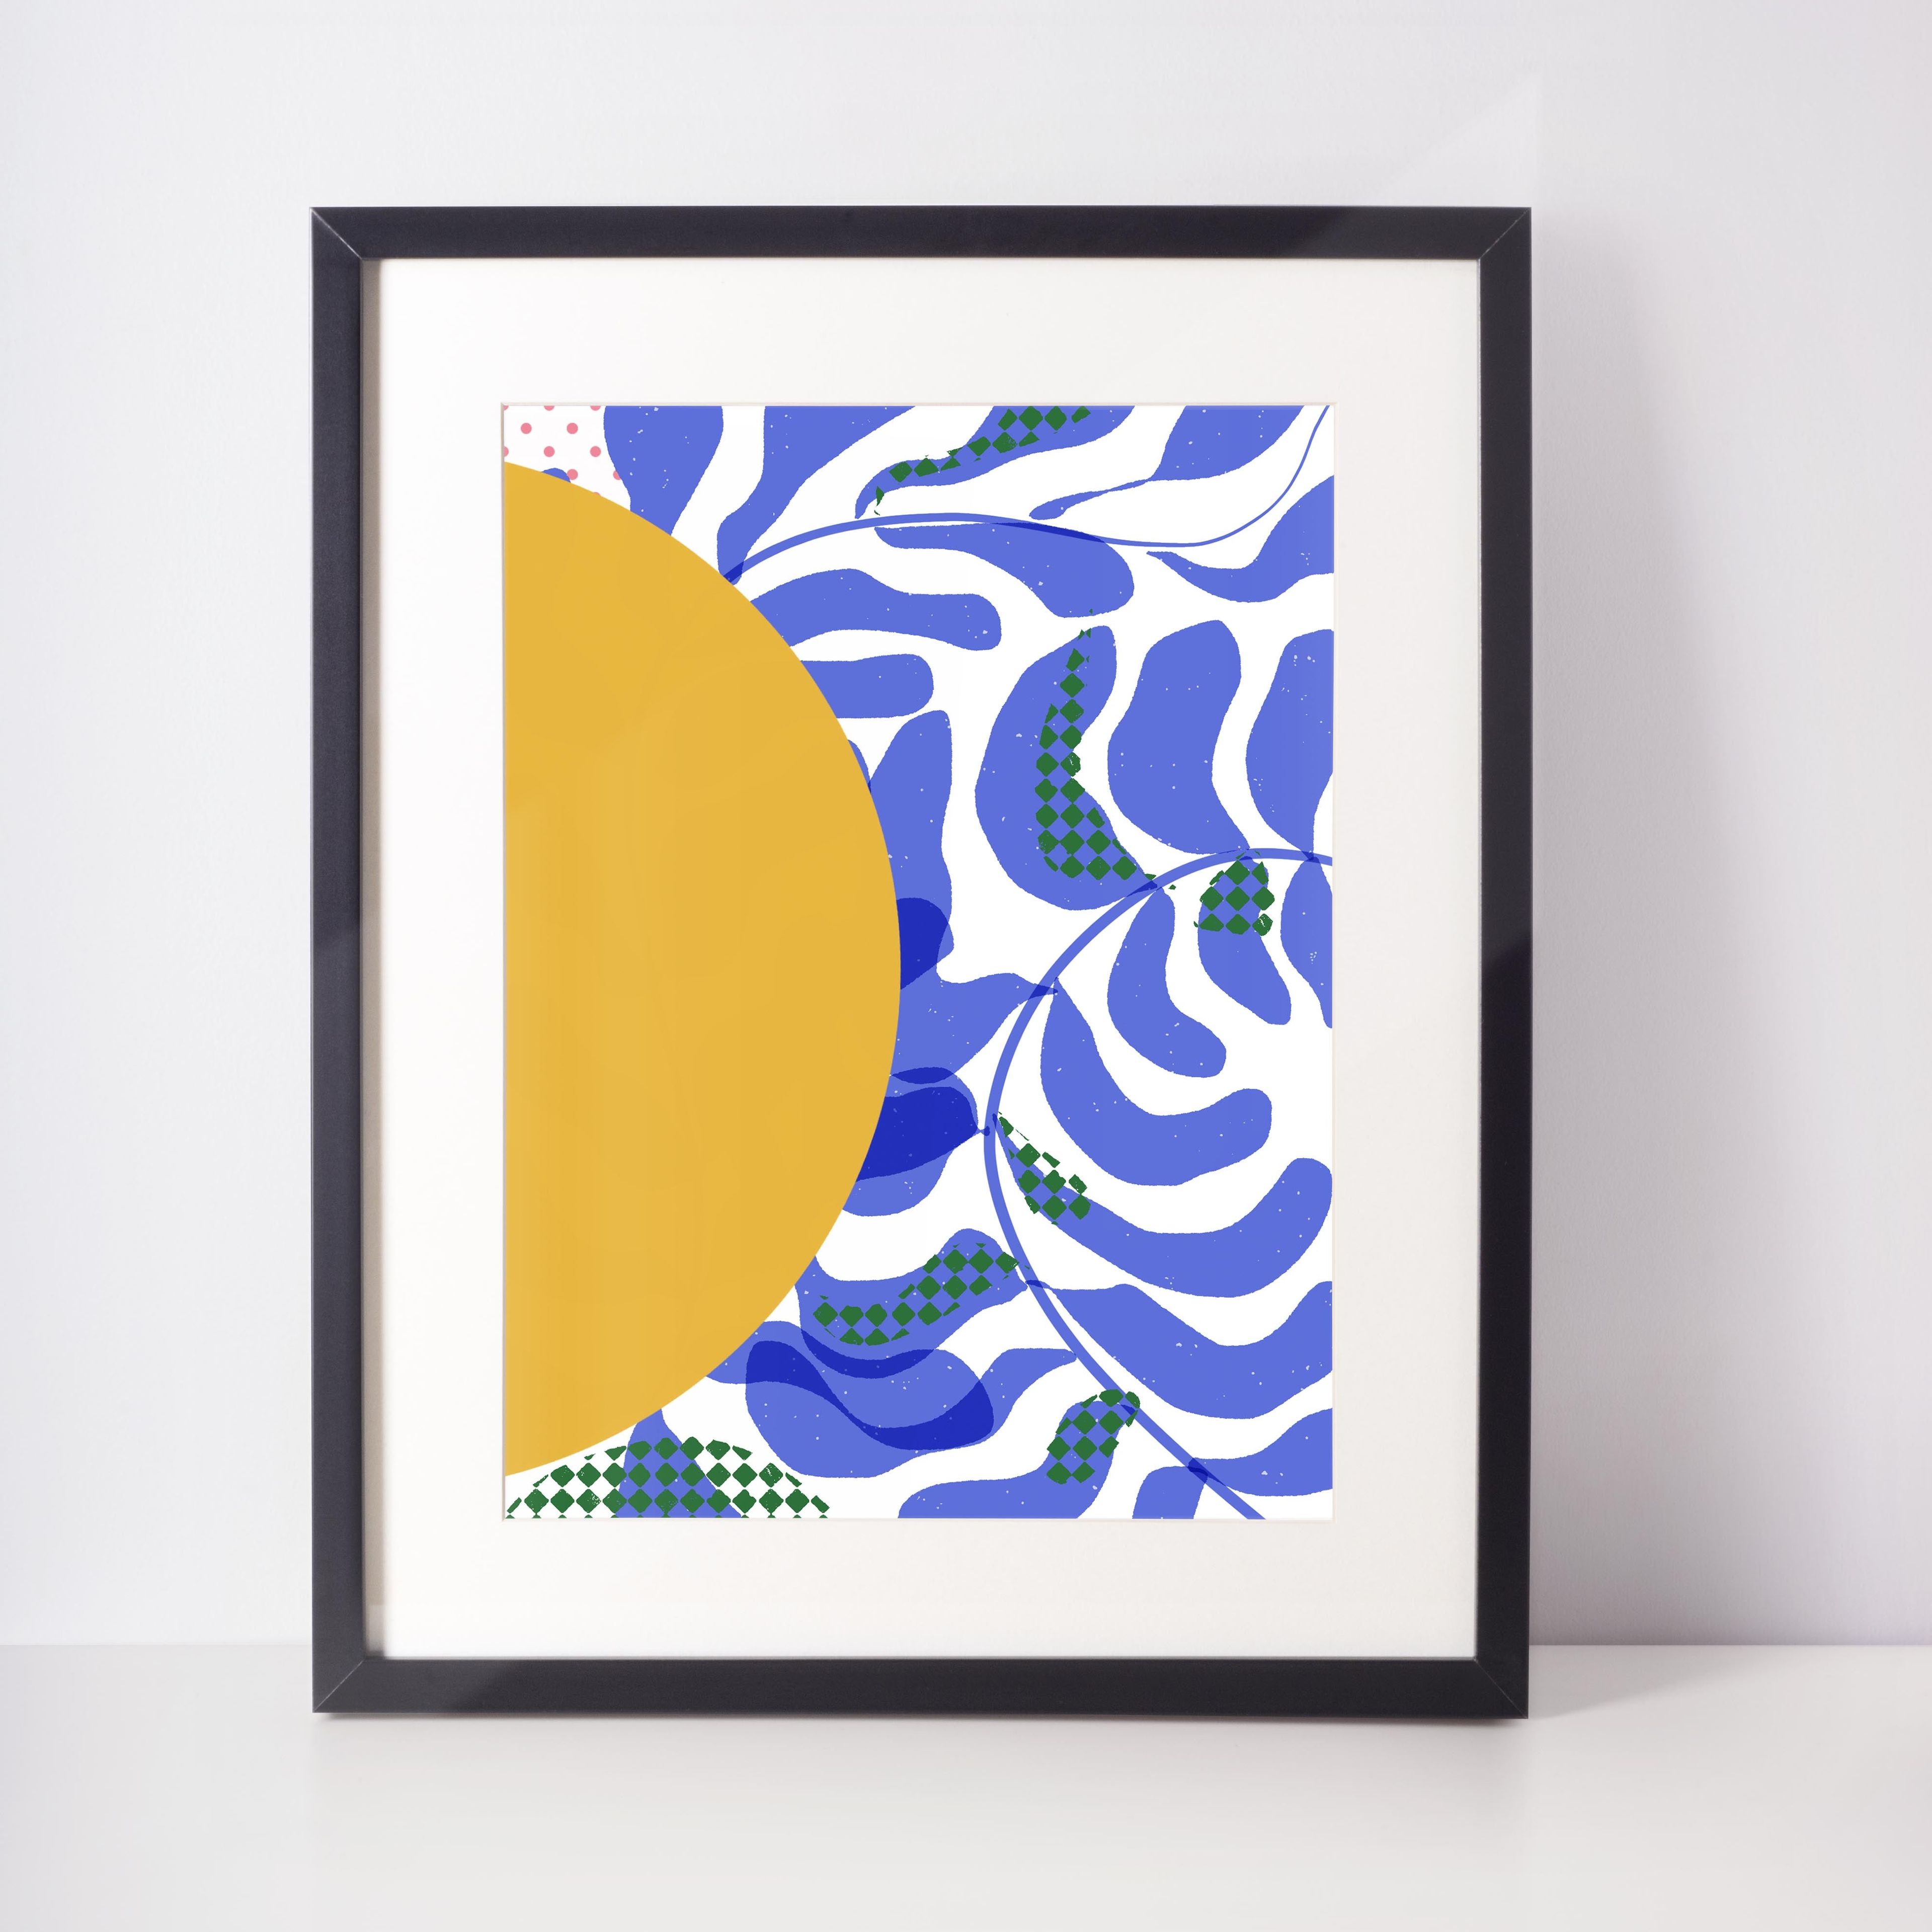 Sunny Abstract Art print, Ready to Frame contemporary Blue and Yellow Wall Art, Abstract Shapes